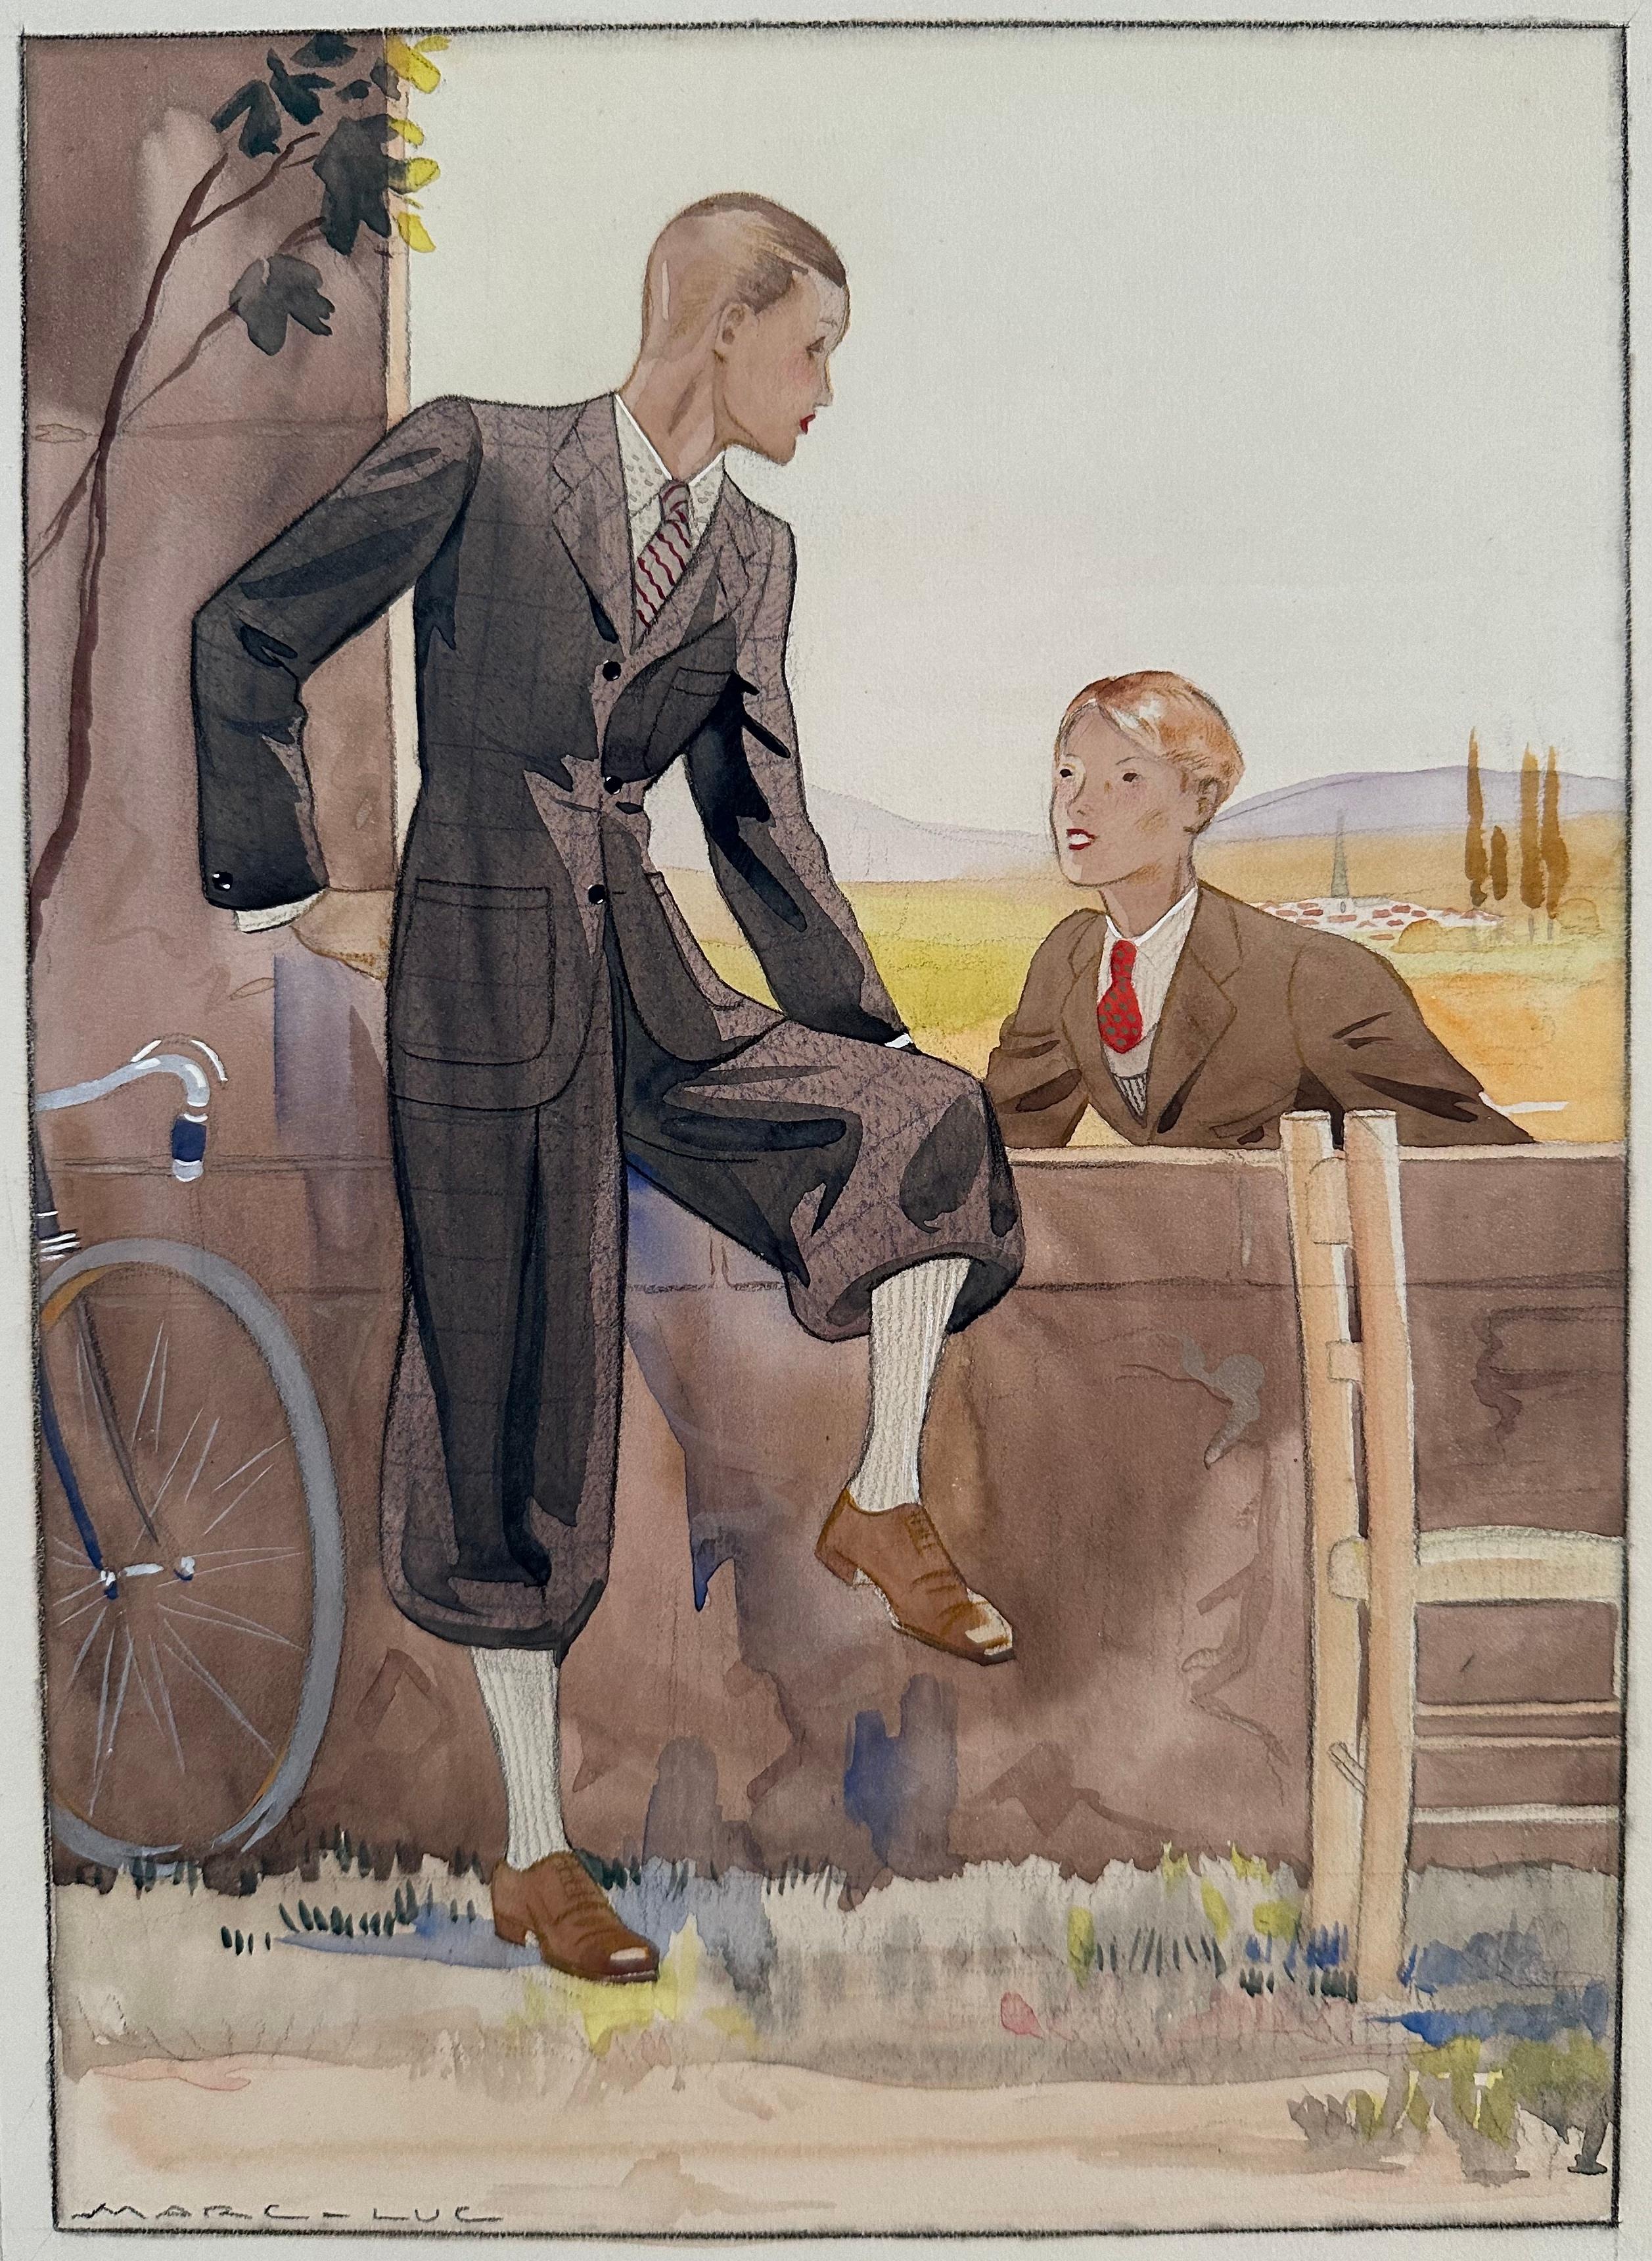 Marc-Luc Figurative Painting - Two Boys (Art Deco Knickers Suit Bicycle riding Attire Fashion Illustration). 